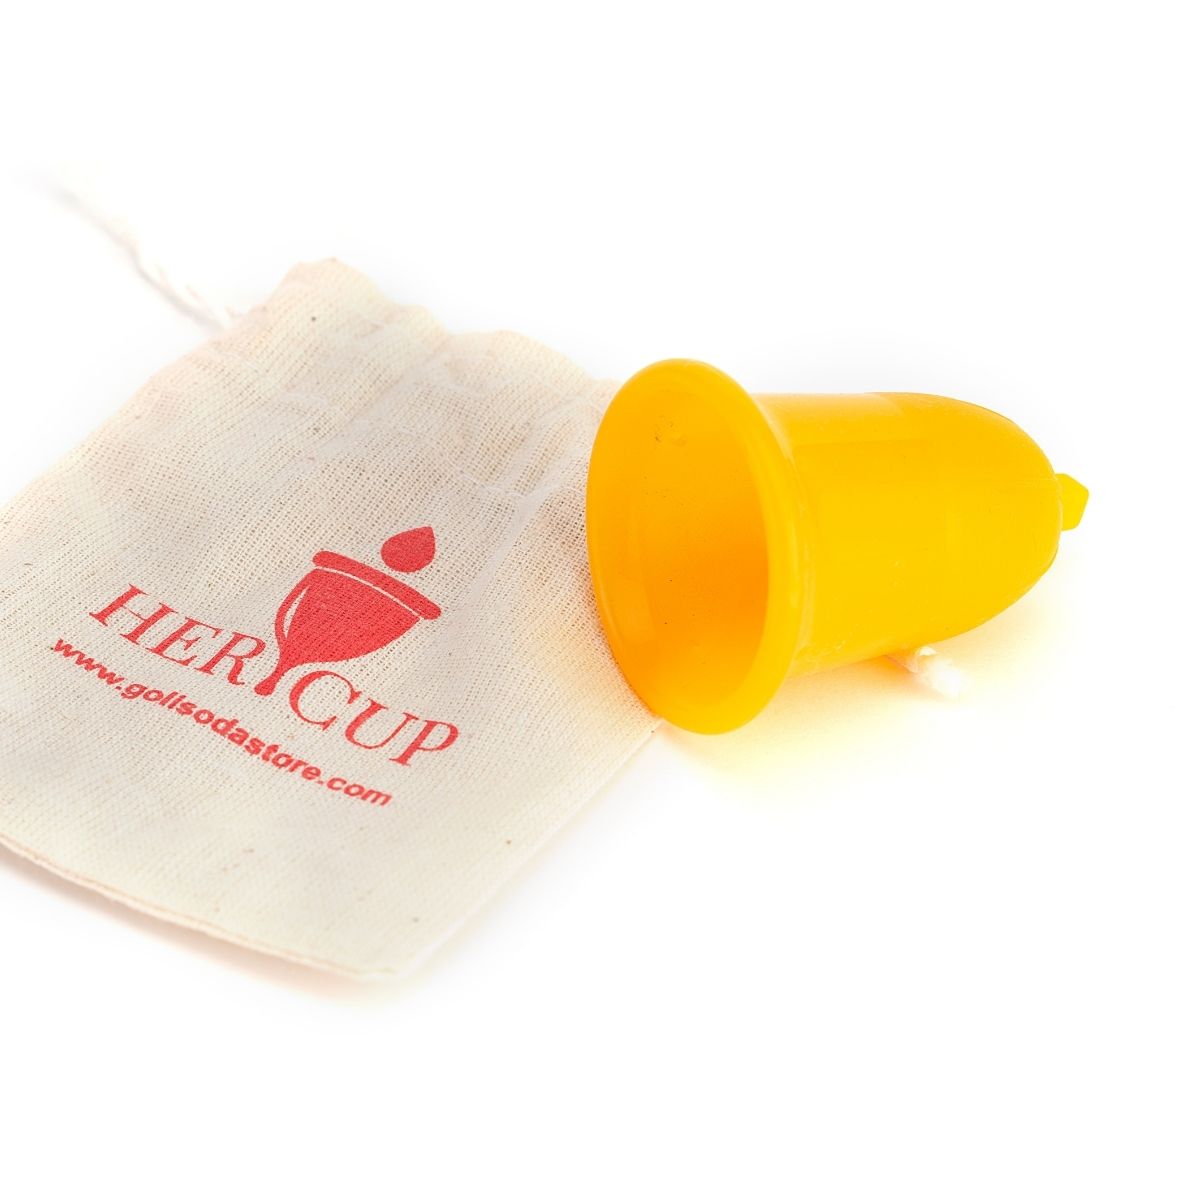 
                  
                    Goli Soda Her Cup Reusable Menstrual Cup for Women - Yellow
                  
                